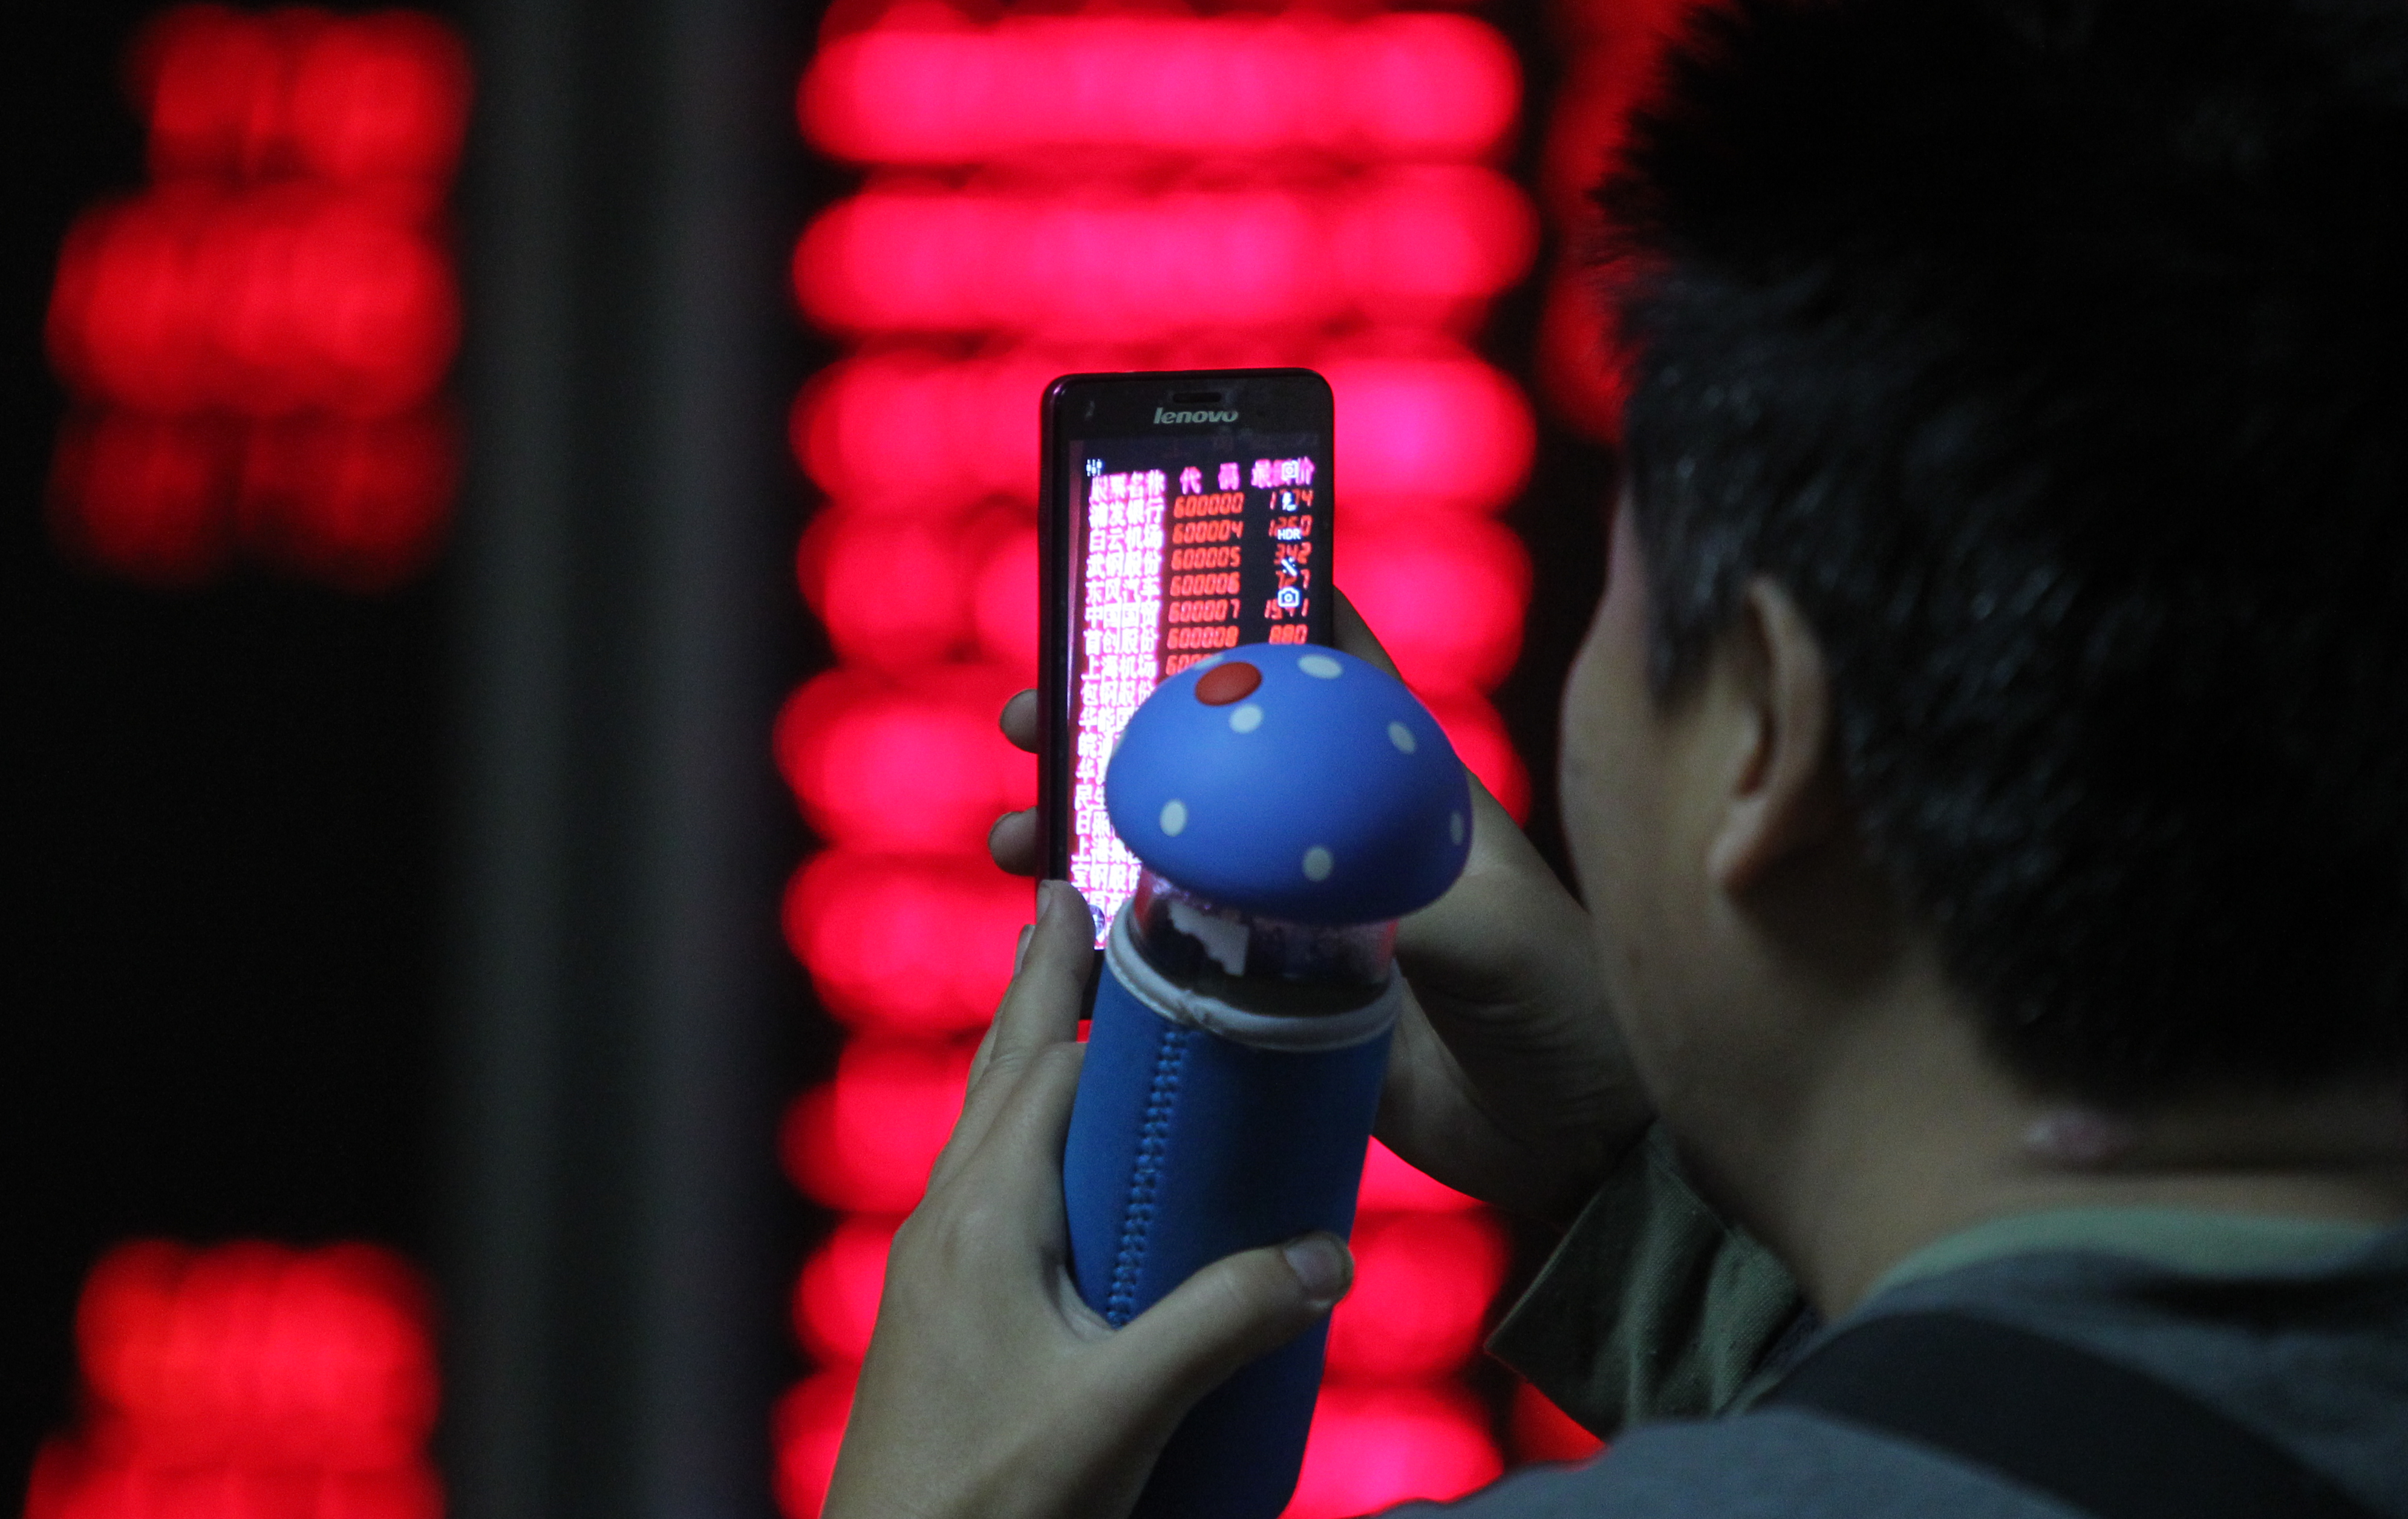 A Chinese investor takes a smartphone photo of electronic displays showing stock prices in a brokerage house in Beijing. Photo: AP